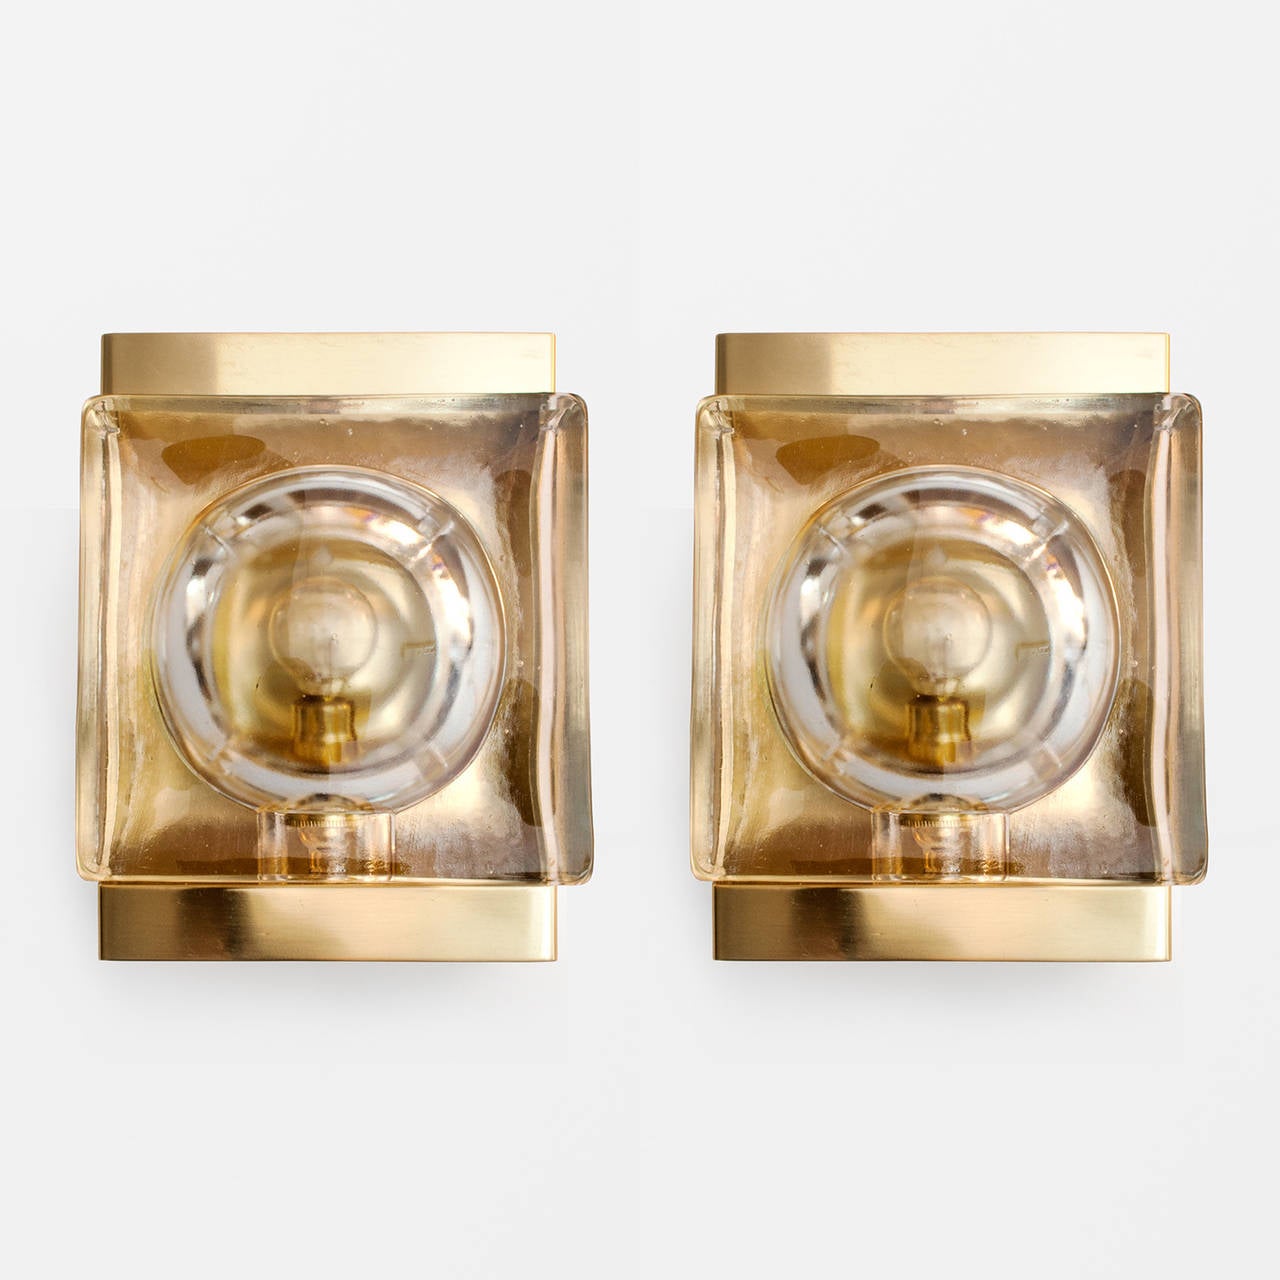 Pair of Danish mid-century modern polished brass sconces with thick molded glass elements. Made by Vitrika. Newly polished and lacquered, new brass candelabra sockets for use in the USA, ready to mount to a standard wall junction box. A second pair